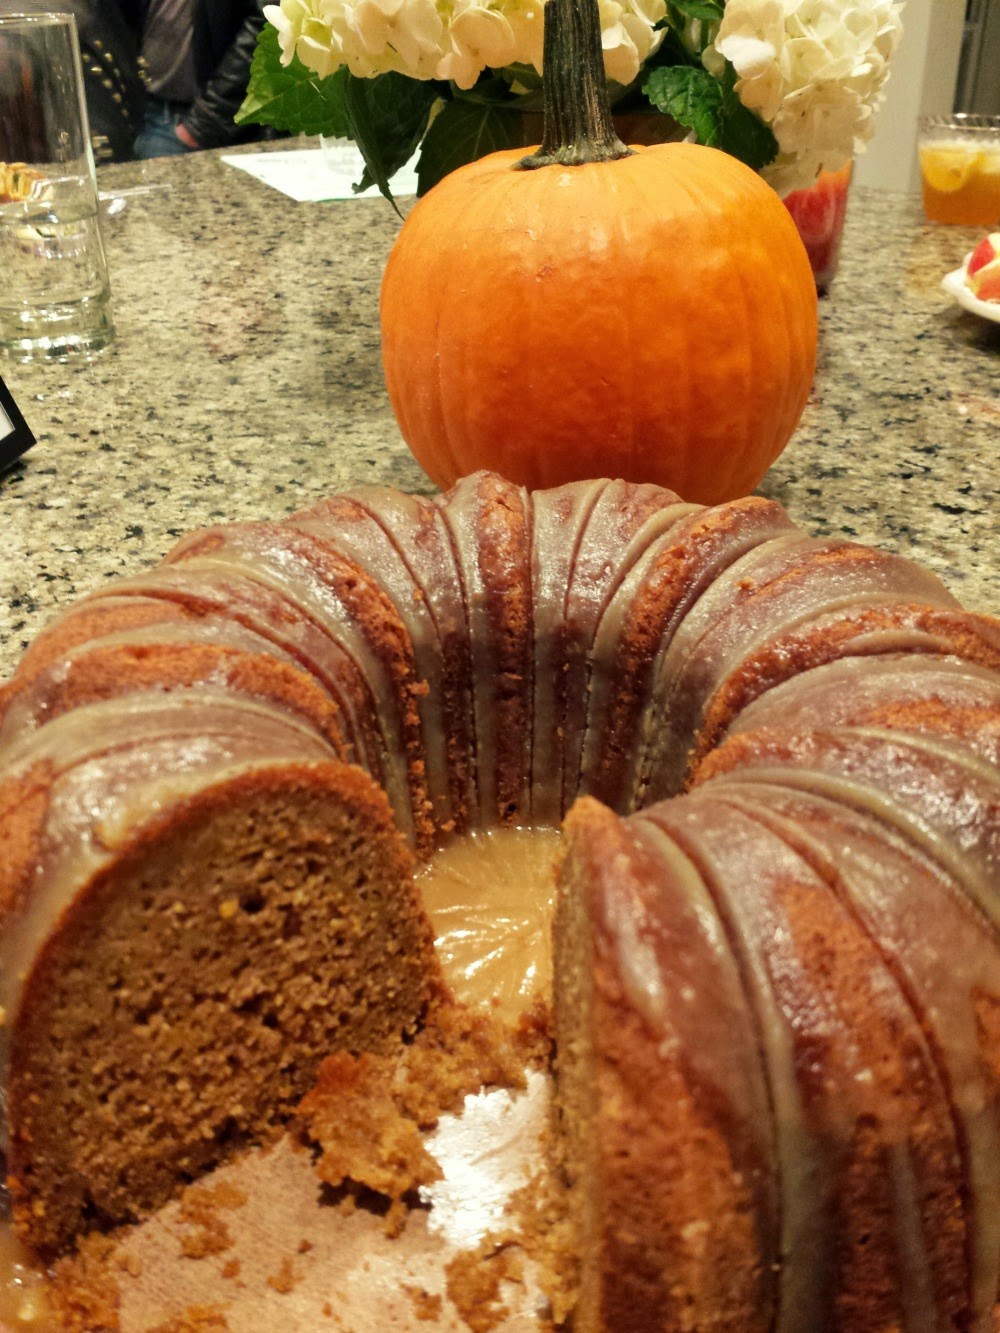 Pumpkin cake made from Papa Spud's pumpkins in farm to fork delivery service